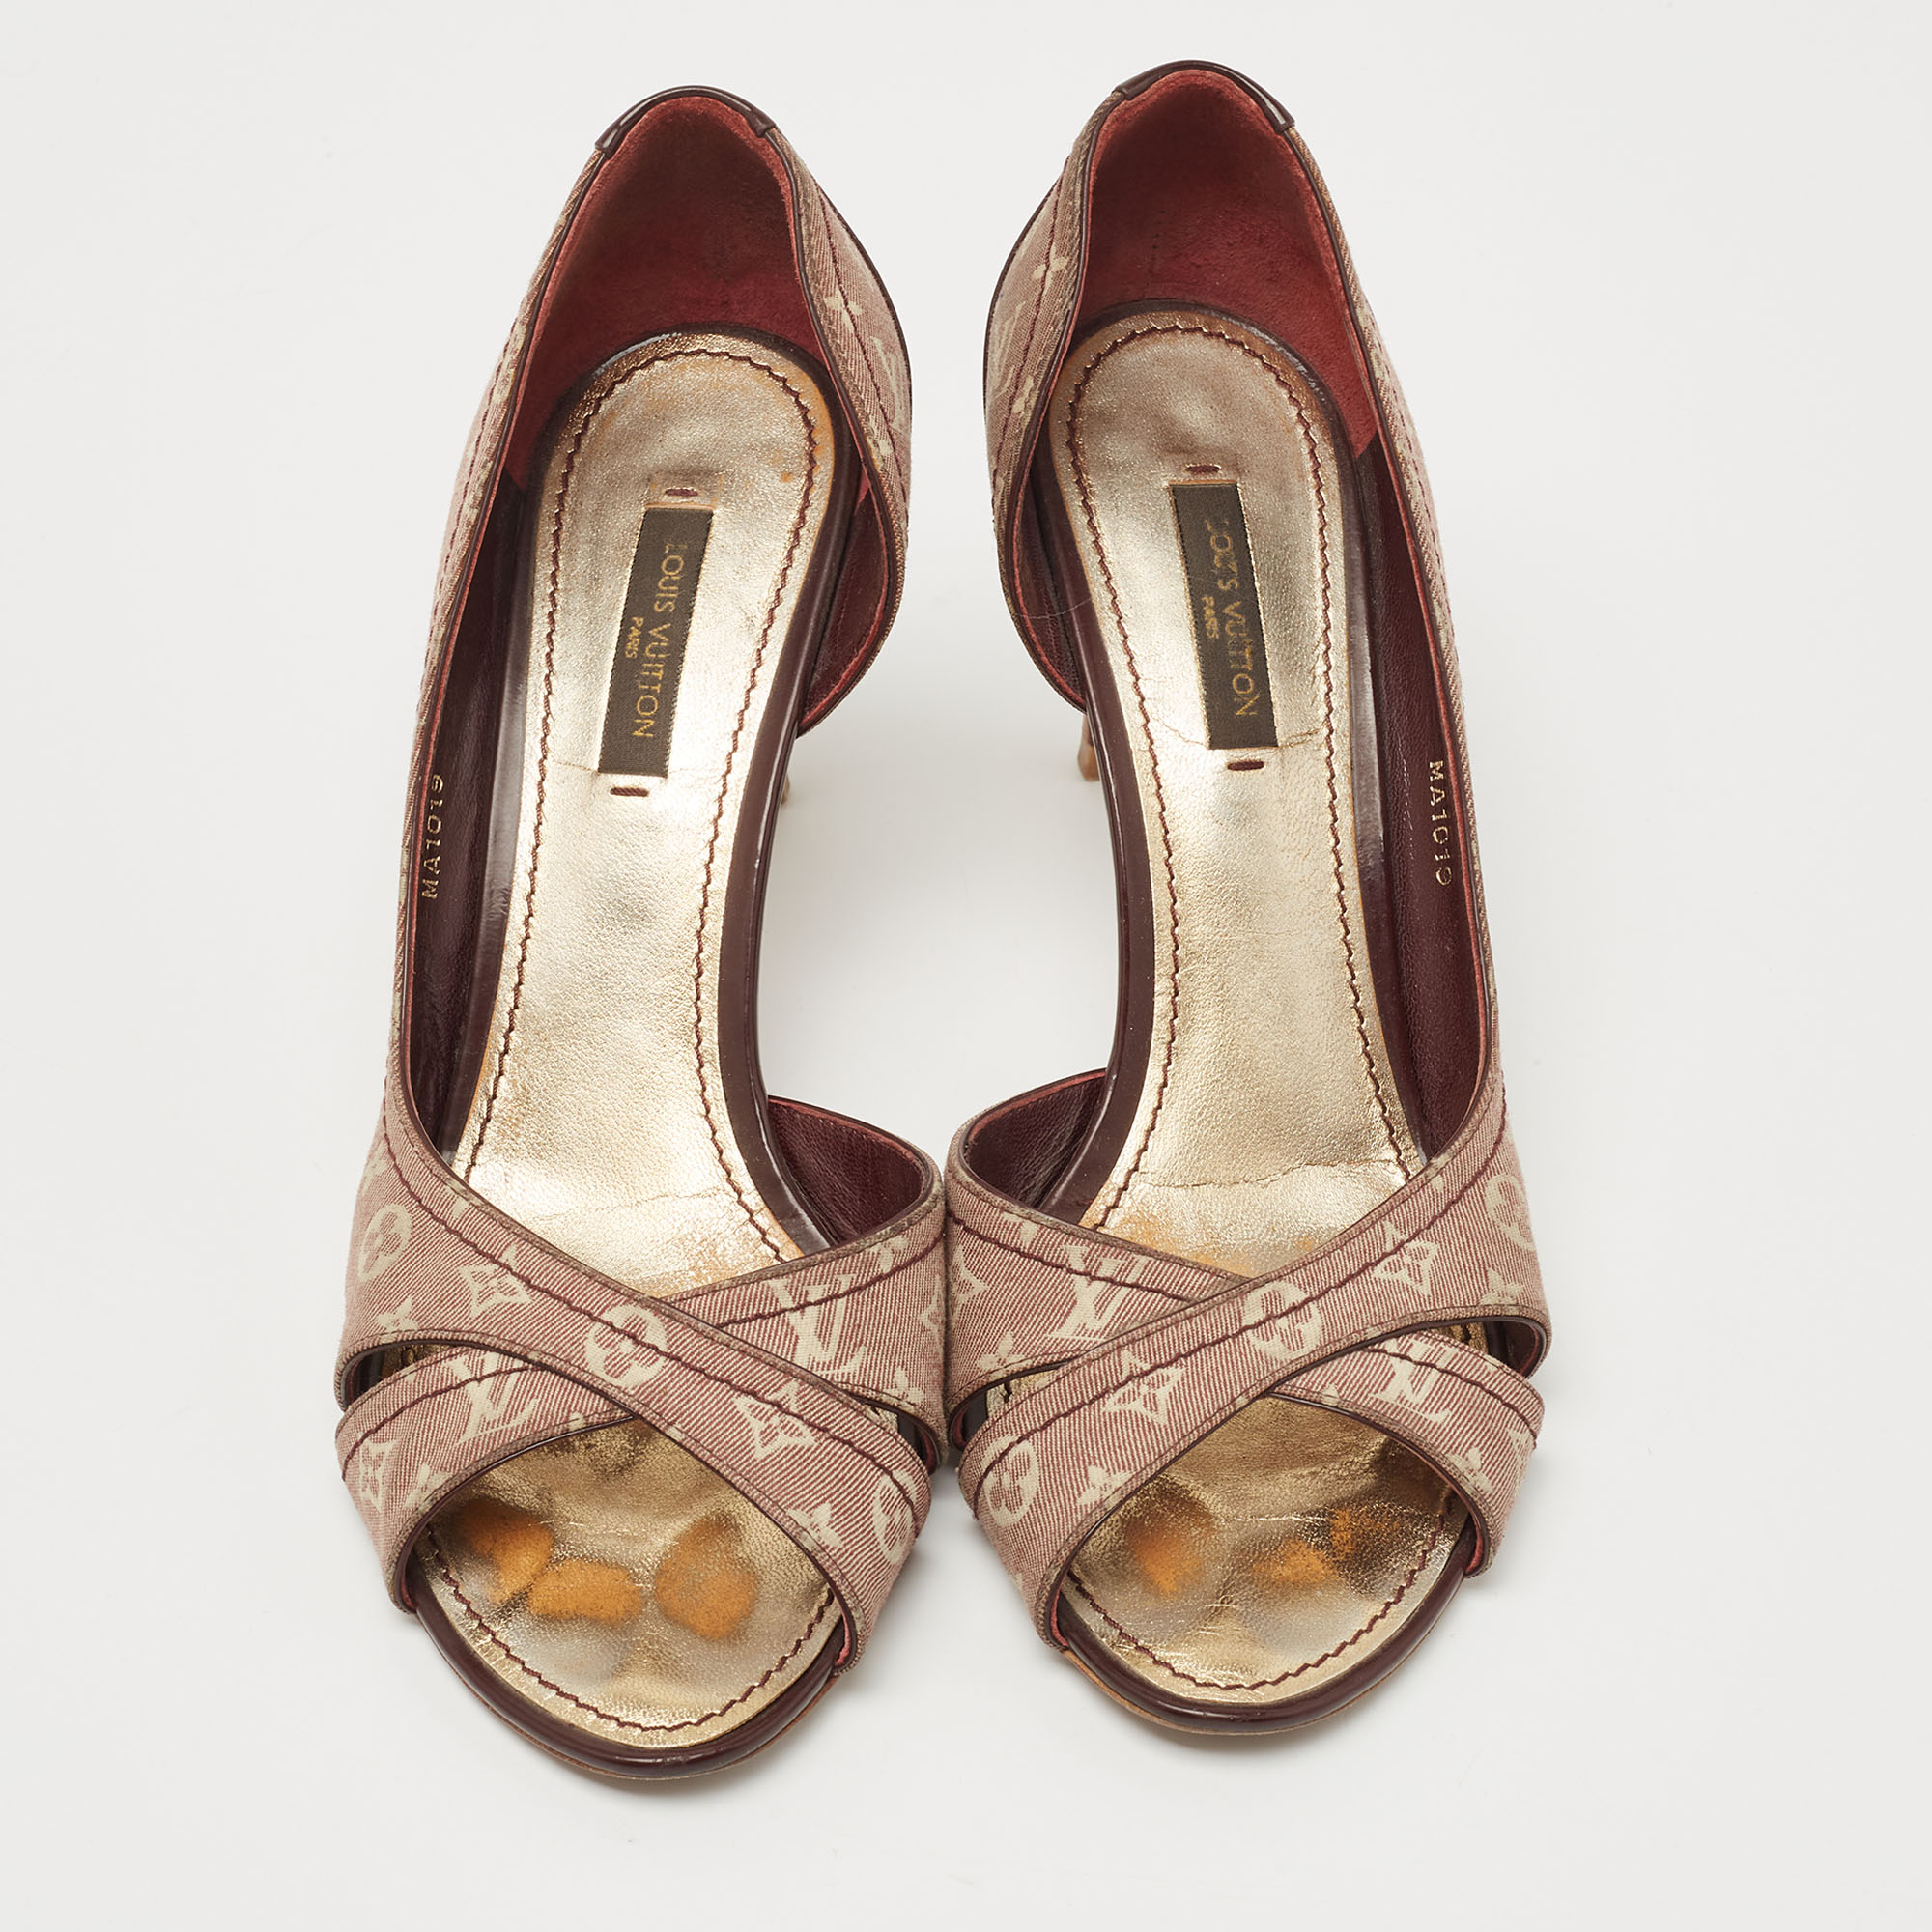 Louis Vuitton Brown/Burgundy Canvas And Patent Leather D'orsay Open Toe Pumps Size 37.5